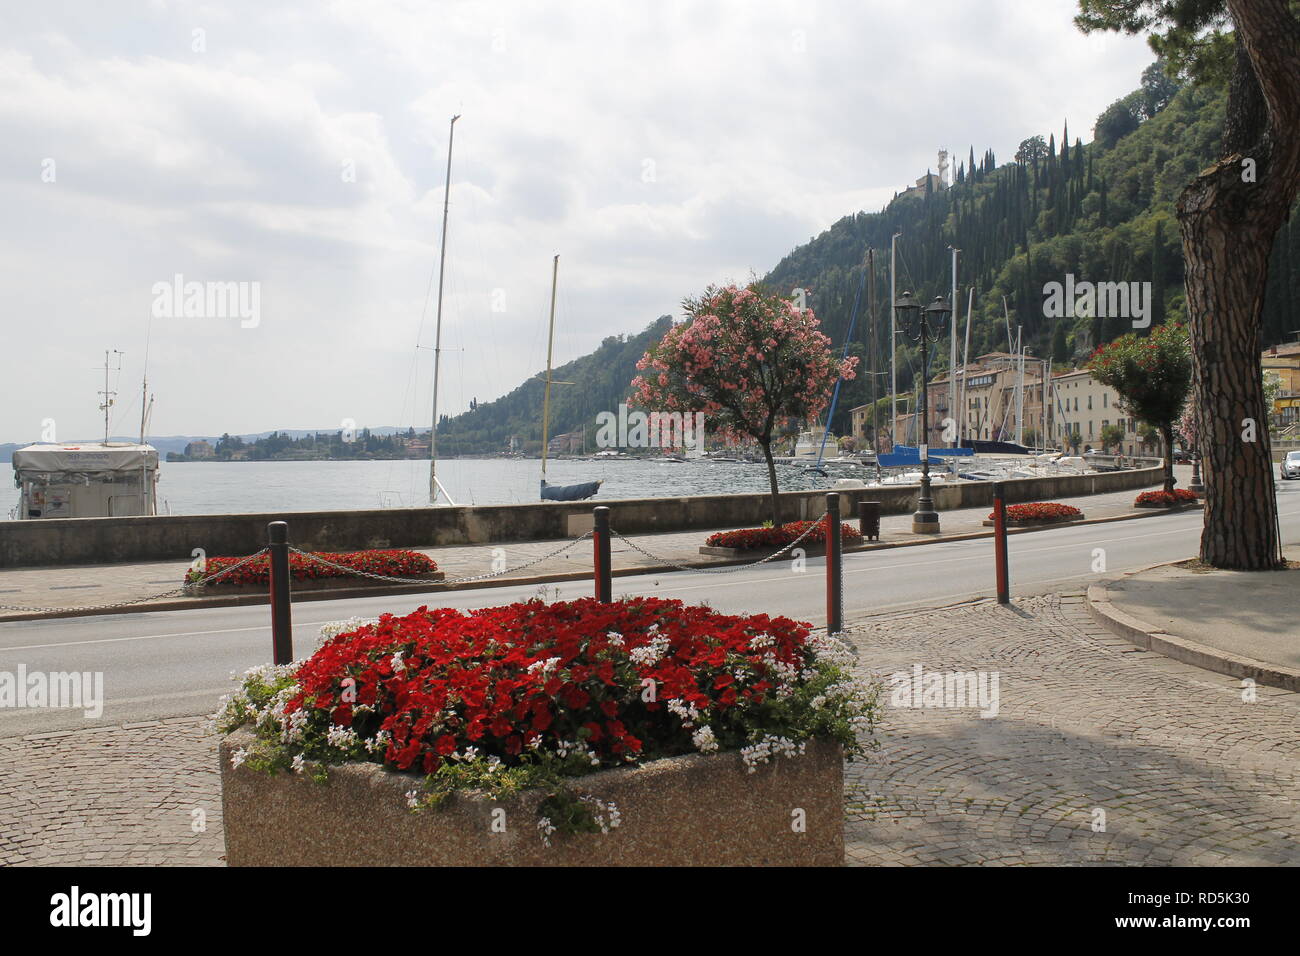 Walkway with colorful flowers on Garda lake in Italy. Stock Photo